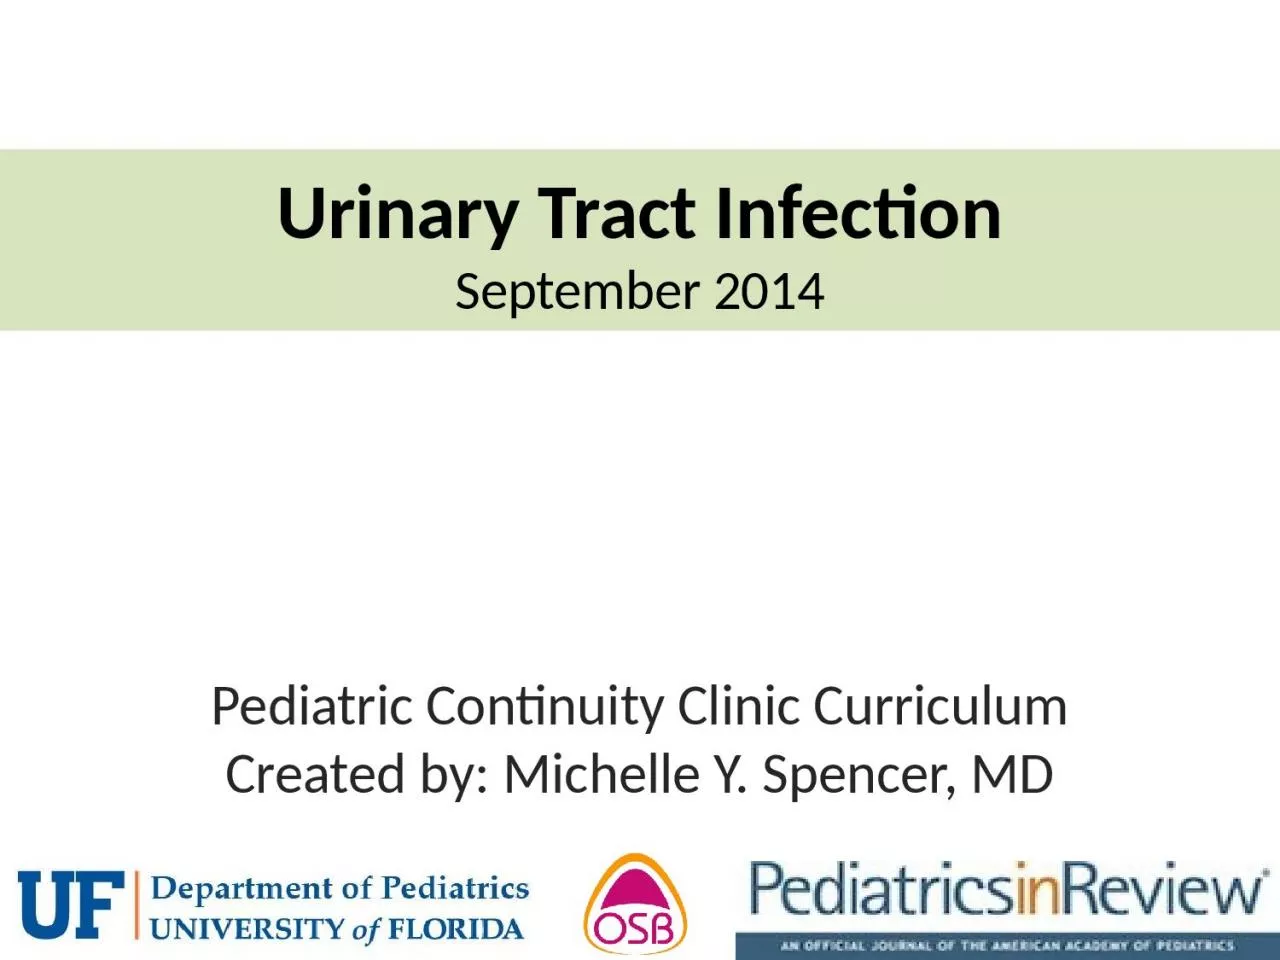 Urinary Tract Infection September 2014